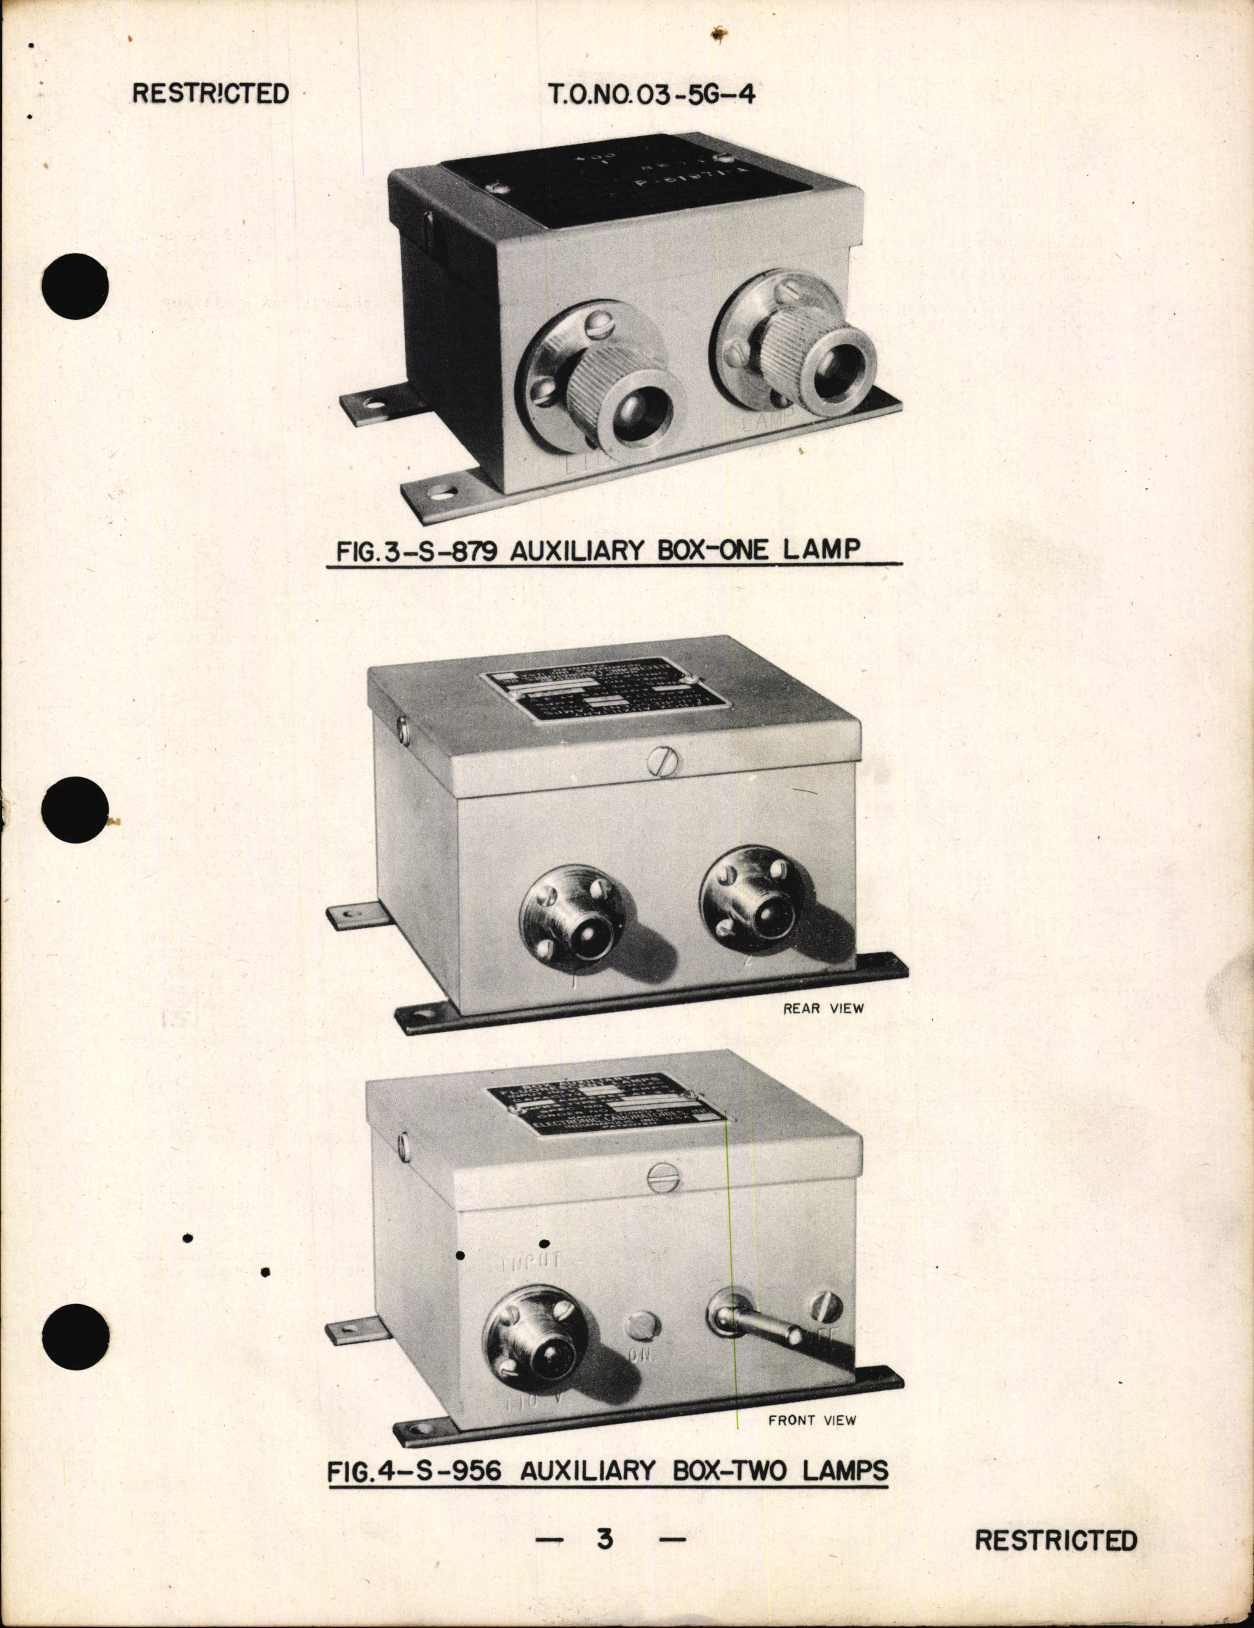 Sample page 5 from AirCorps Library document: Preliminary Handbook of Instructions with Parts Catalog for Fluorescent Lamp Auxiliary Box Assemblies S-840, S-841, S-879, and S-956